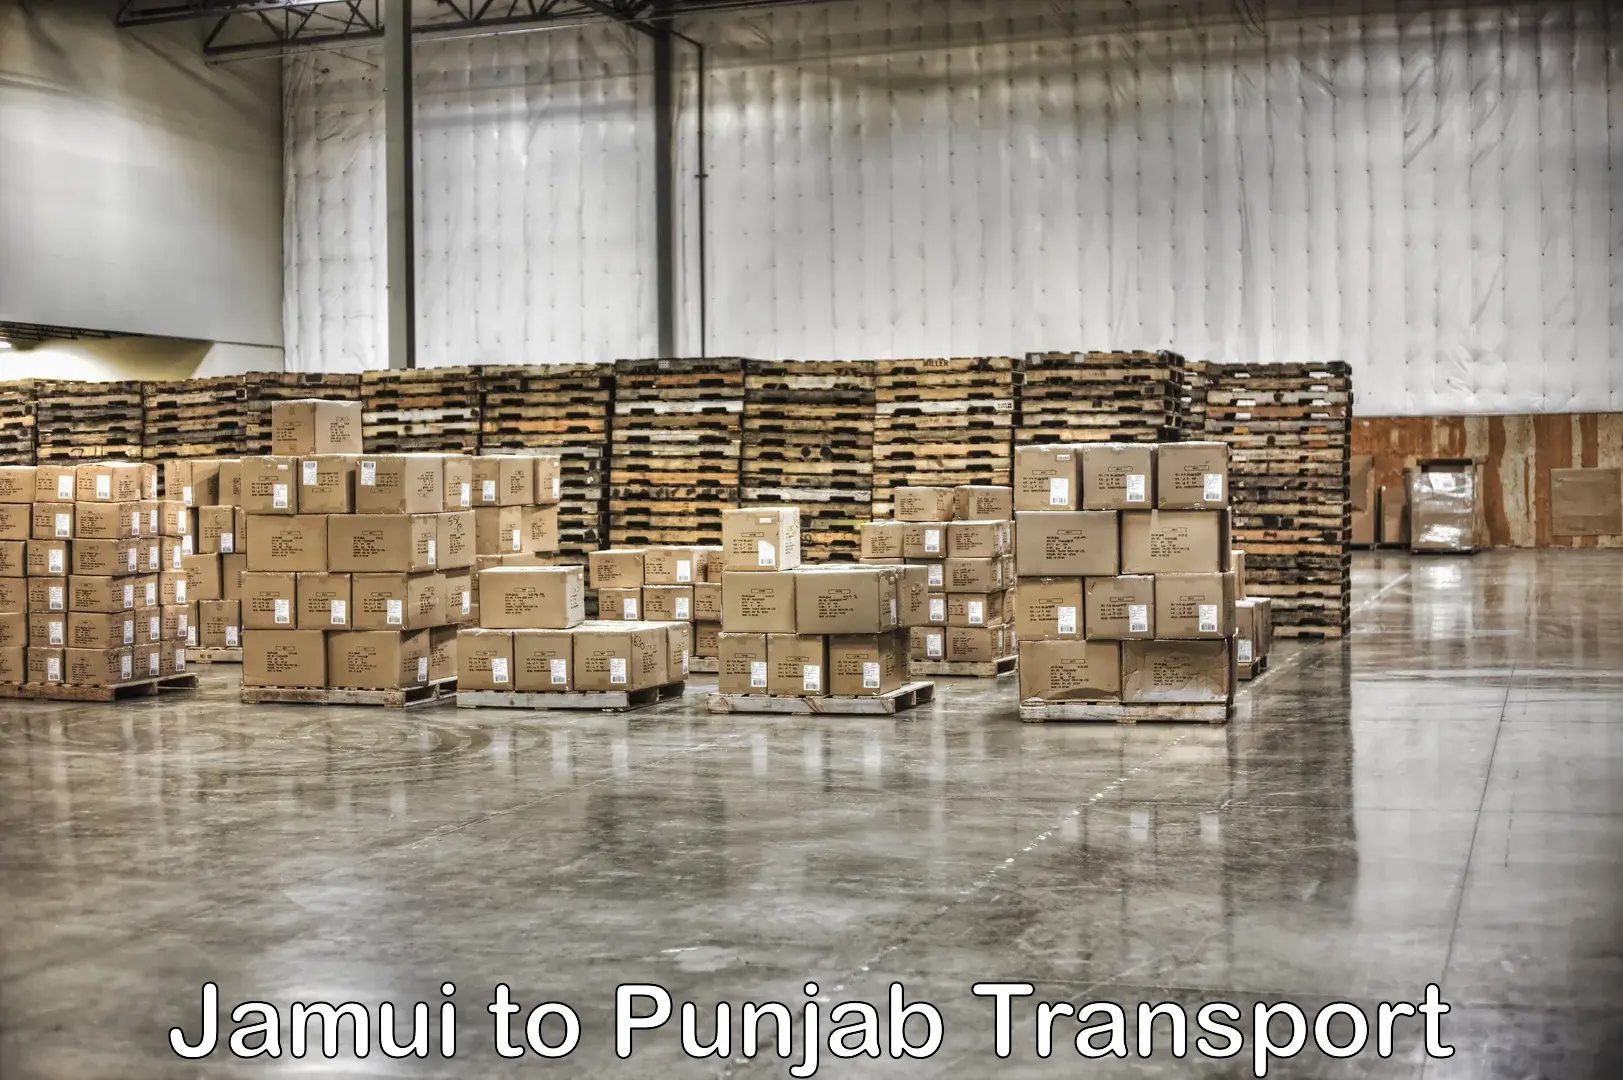 Transport shared services Jamui to Sultanpur Lodhi